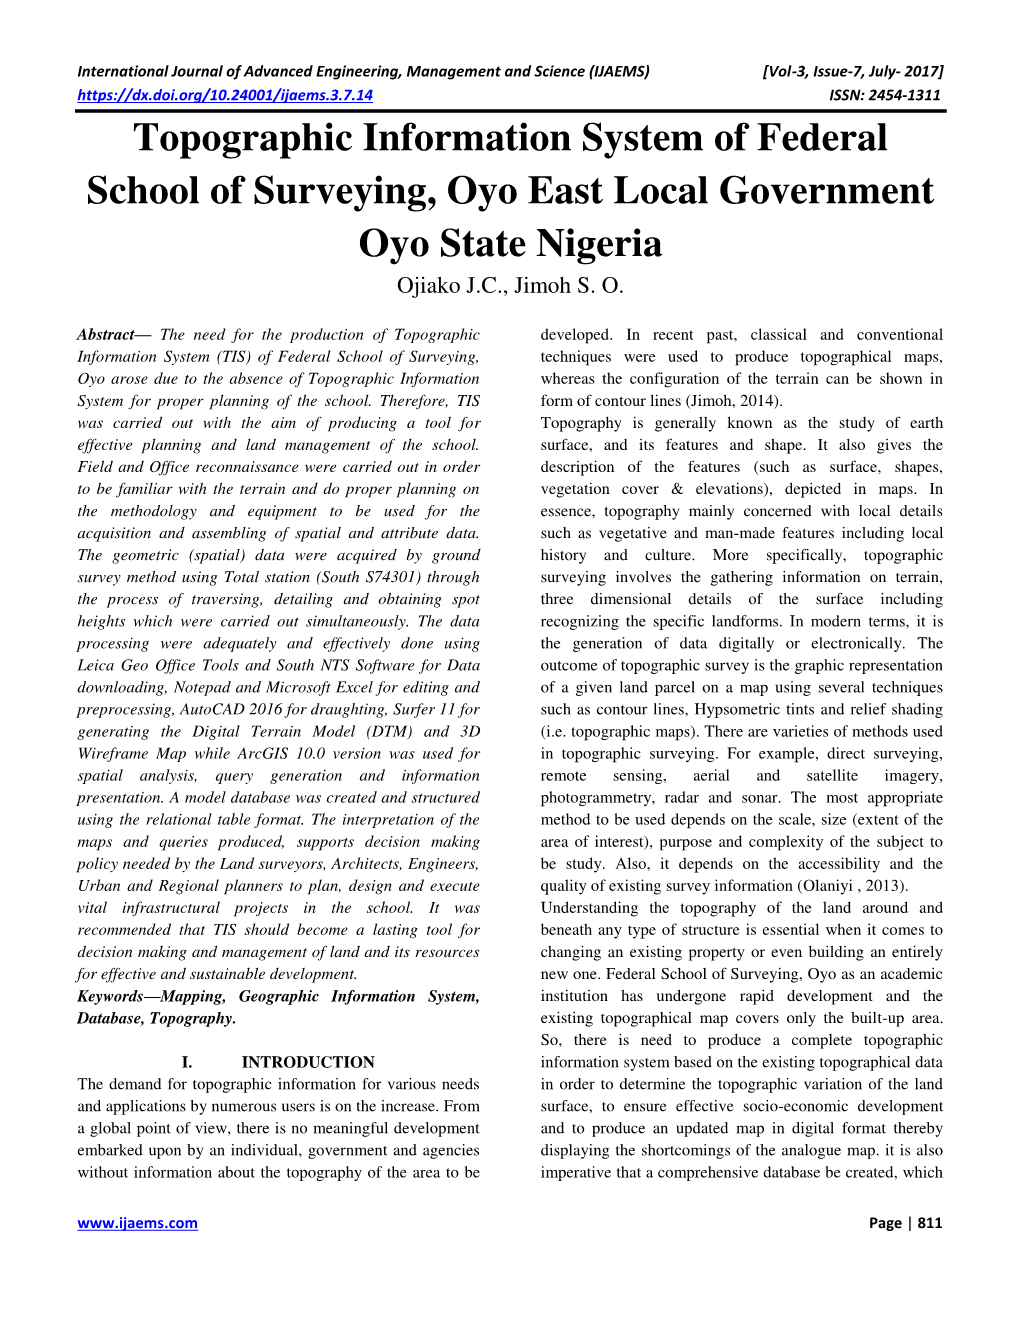 Topographic Information System of Federal School of Surveying, Oyo East Local Government Oyo State Nigeria Ojiako J.C., Jimoh S